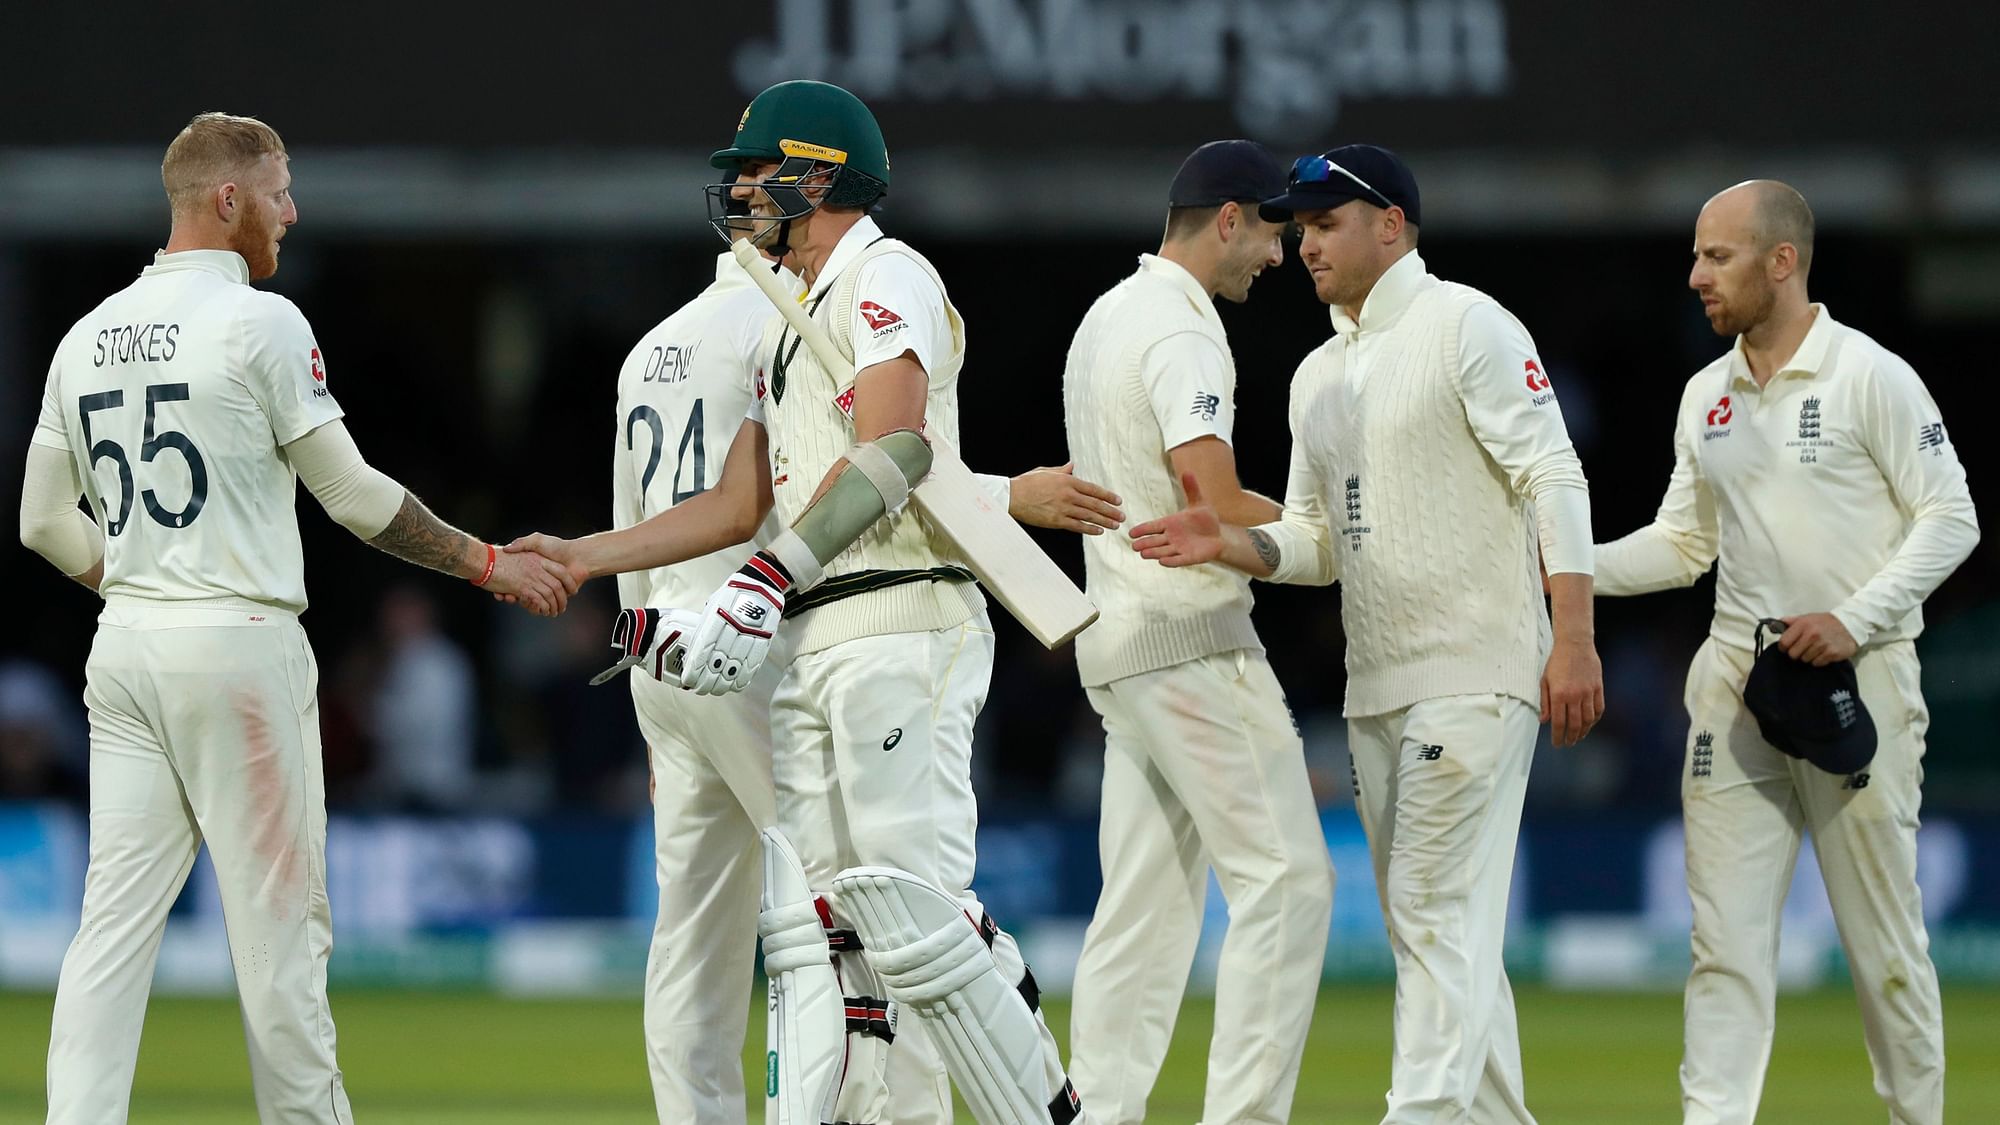 Australia held out for a draw in the second Ashes Test against England at Lord’s.